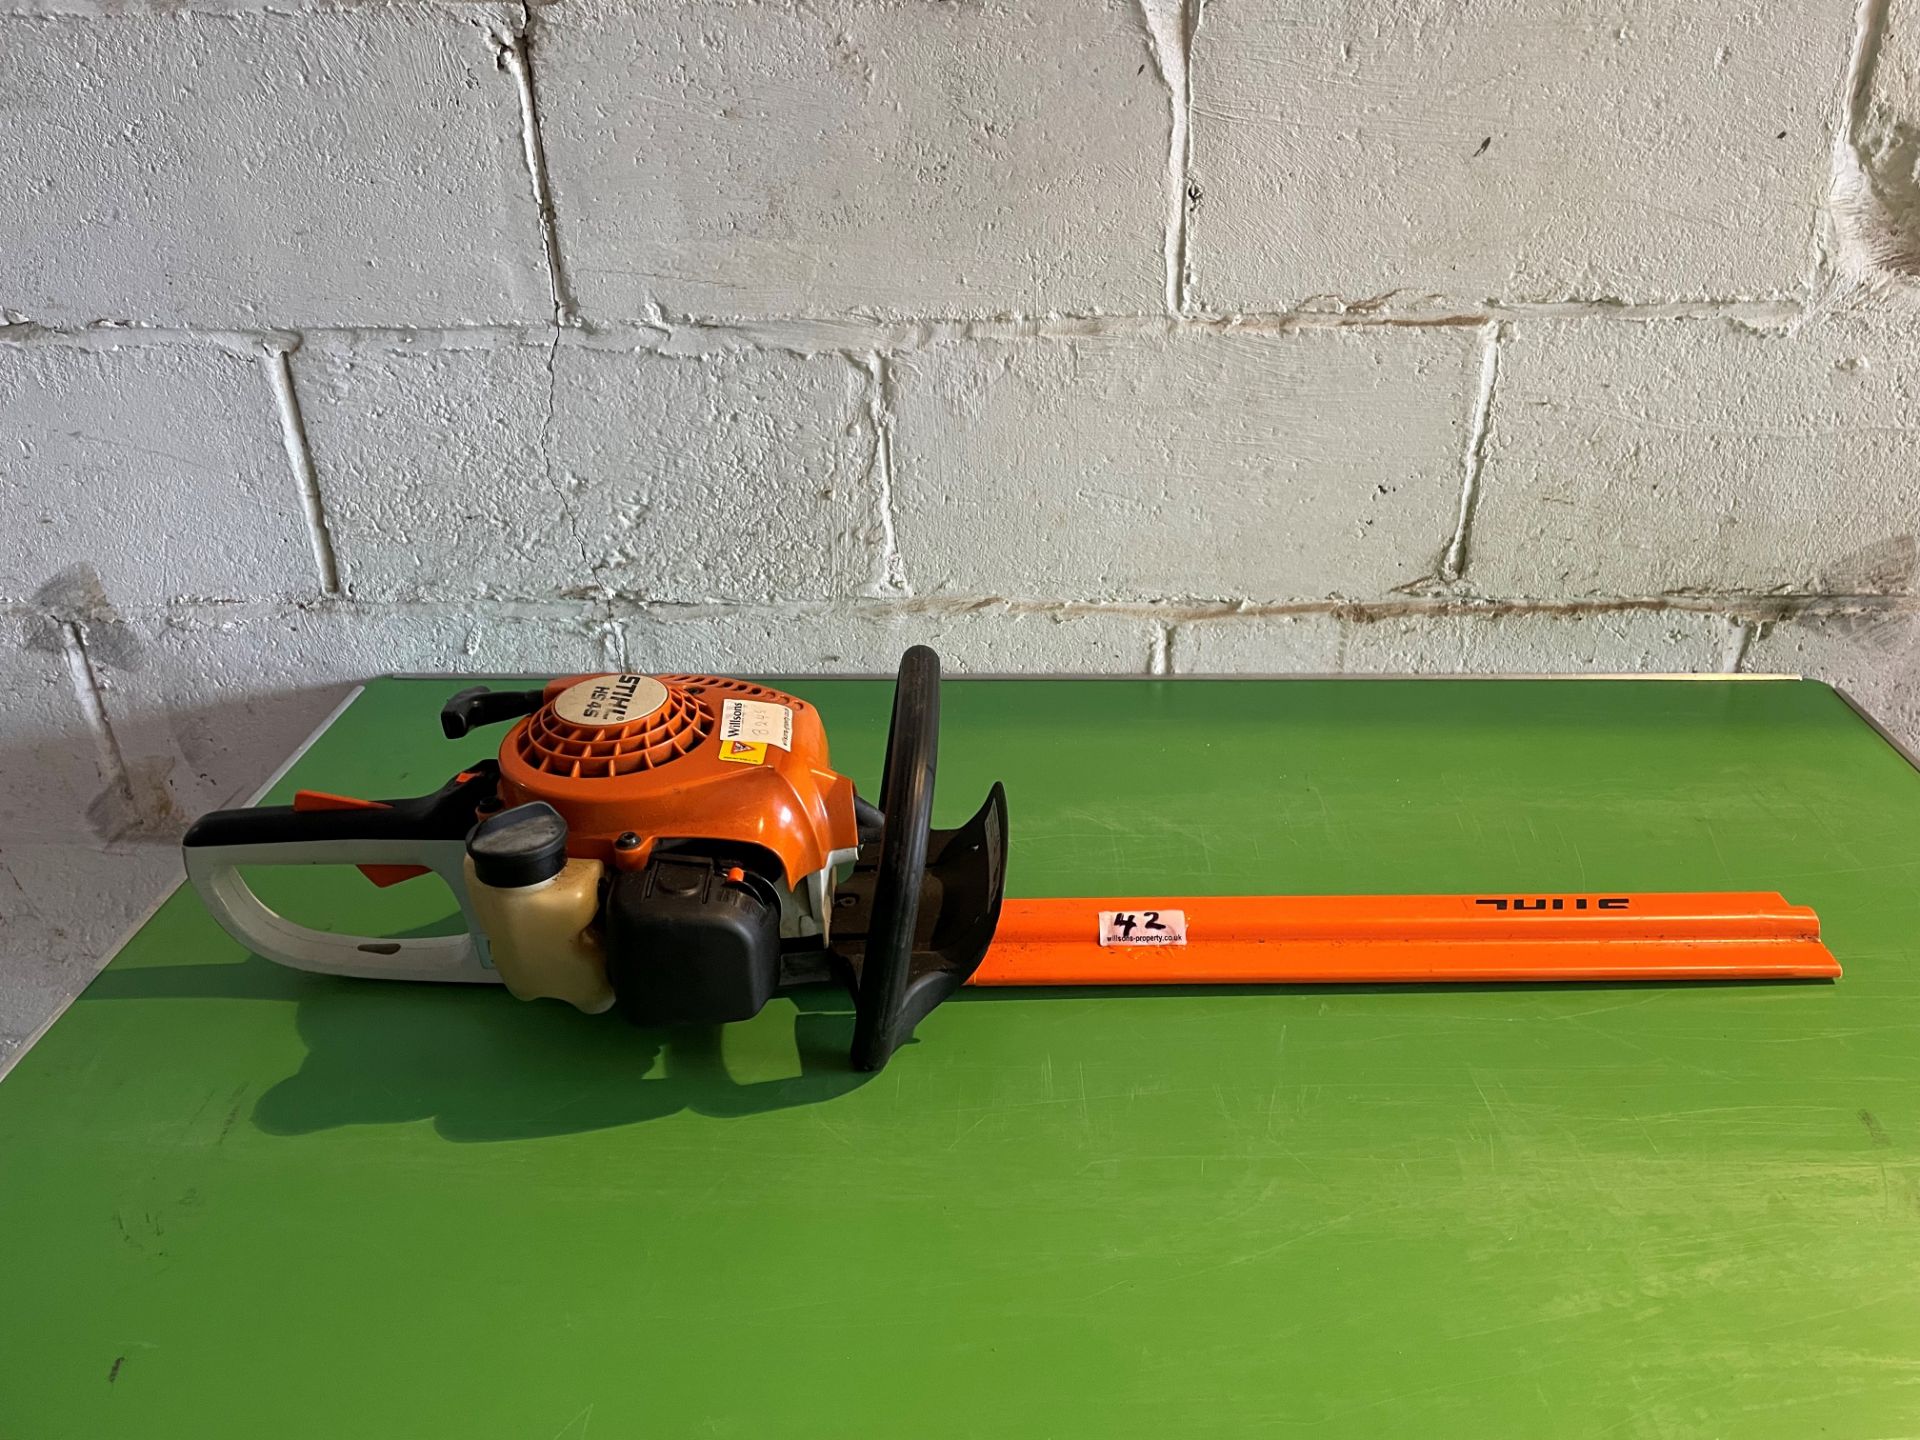 Stihl HS45 petrol engine hedge trimmer in very good condition